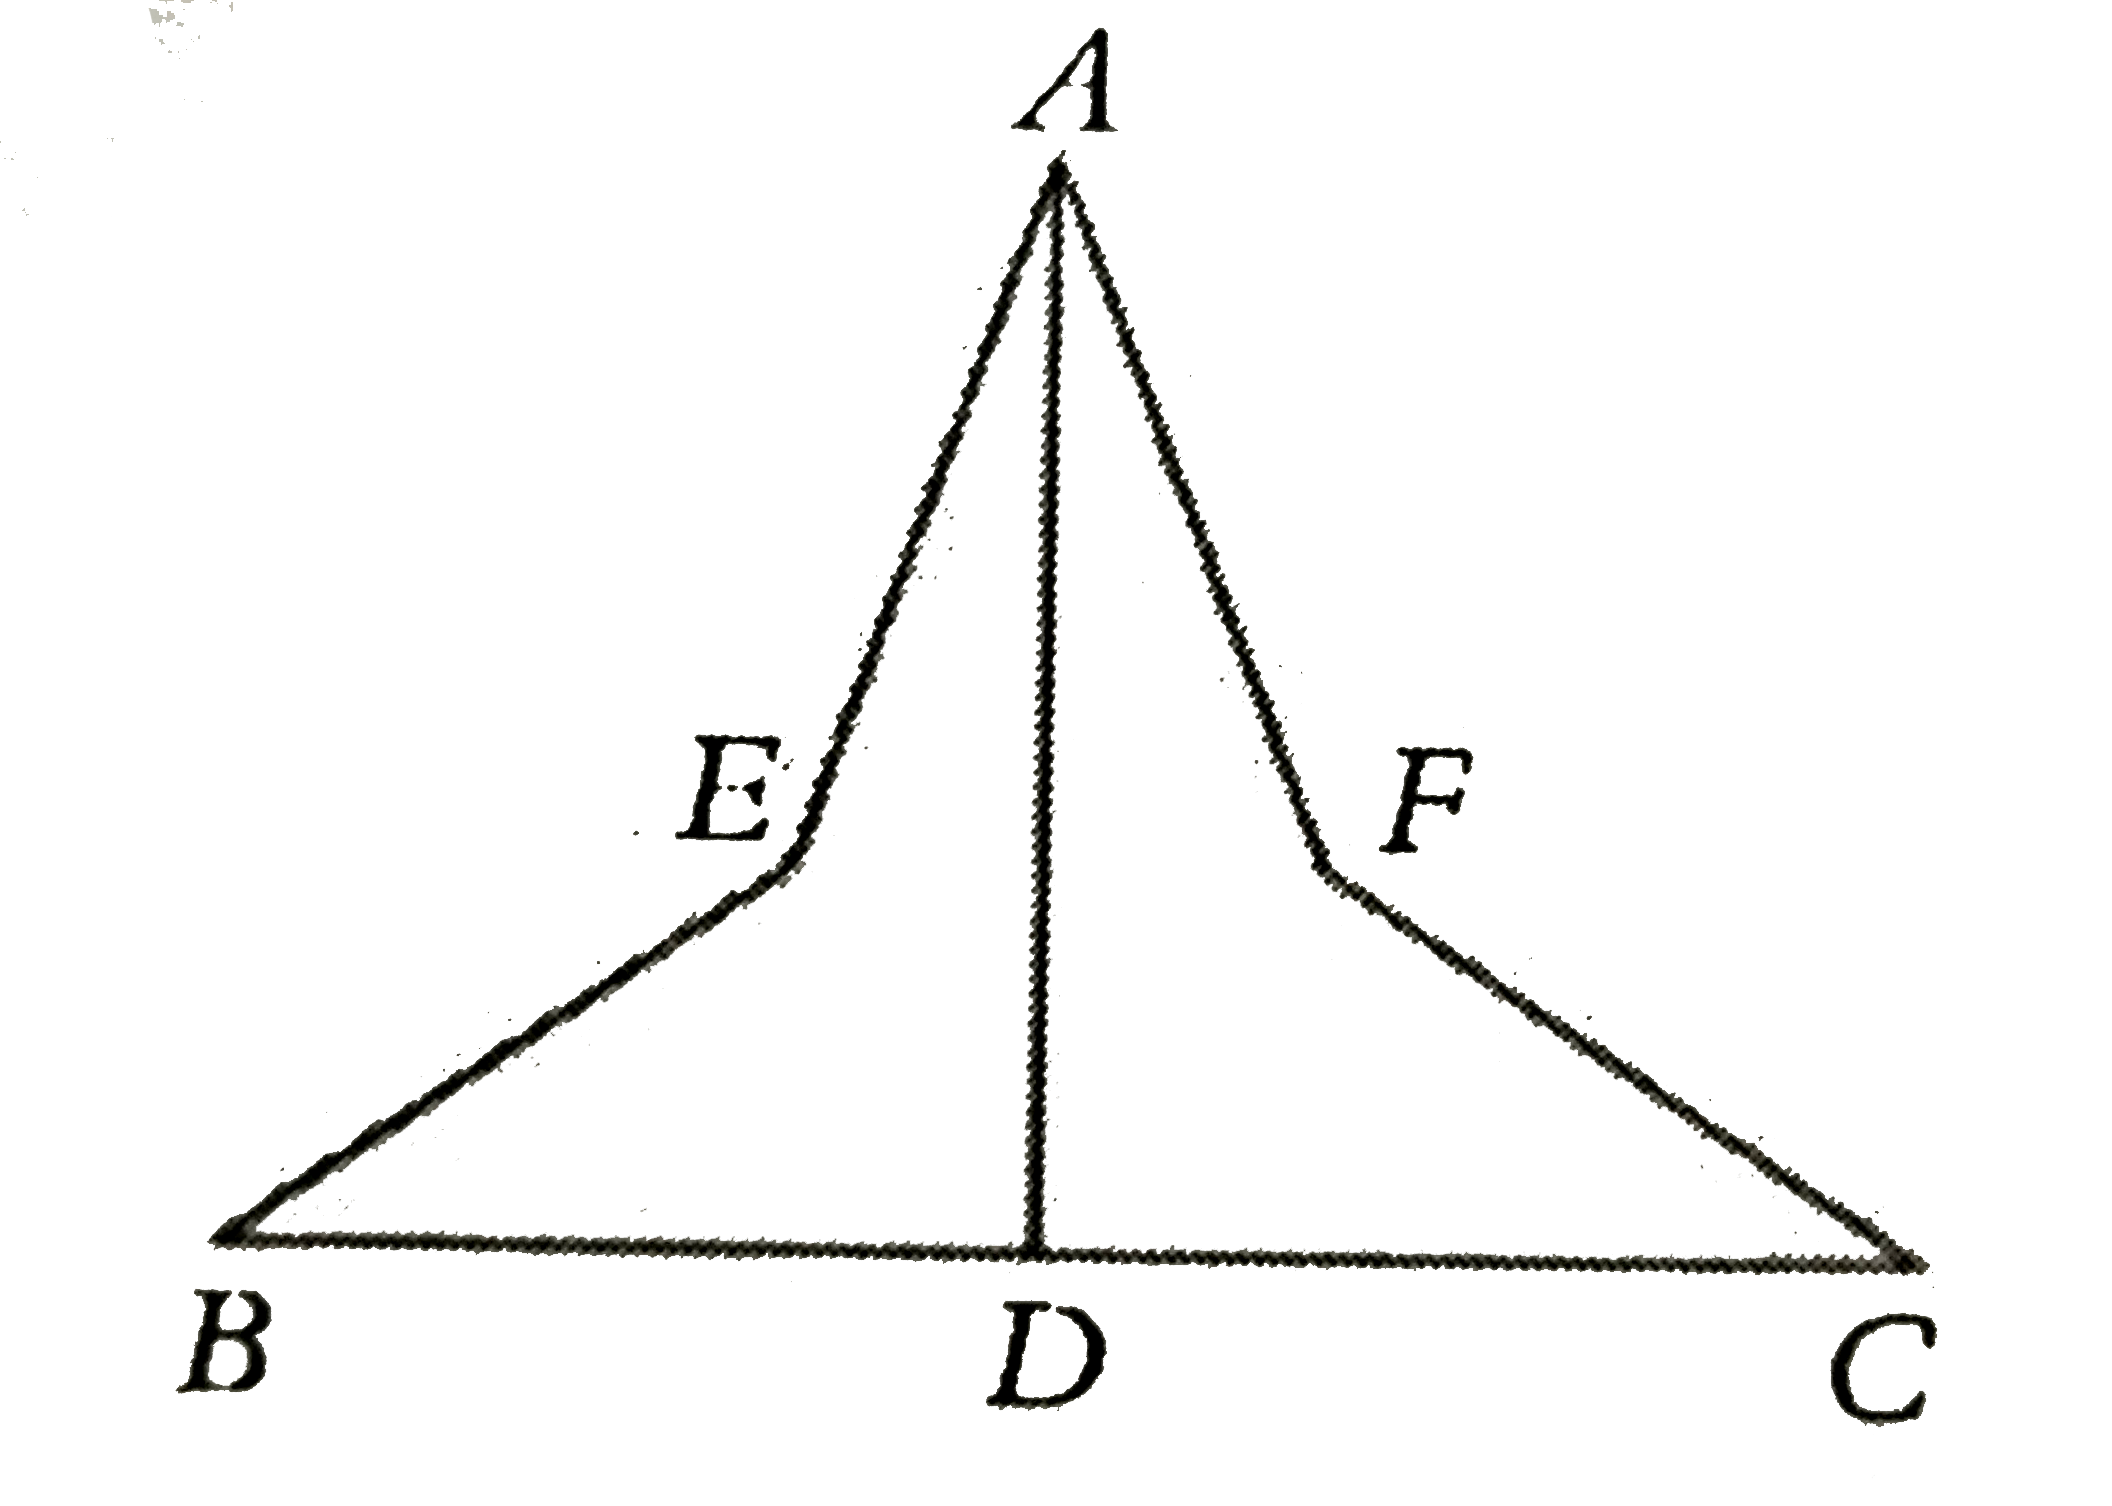 In the figuare above ( not to scale), bar(AD) is the angle bisector of /EAF, /AFC = 110^(@) and / DCF =20^(@). If / DAF =30^(@) and / EBD =10^(@), then / AEB =